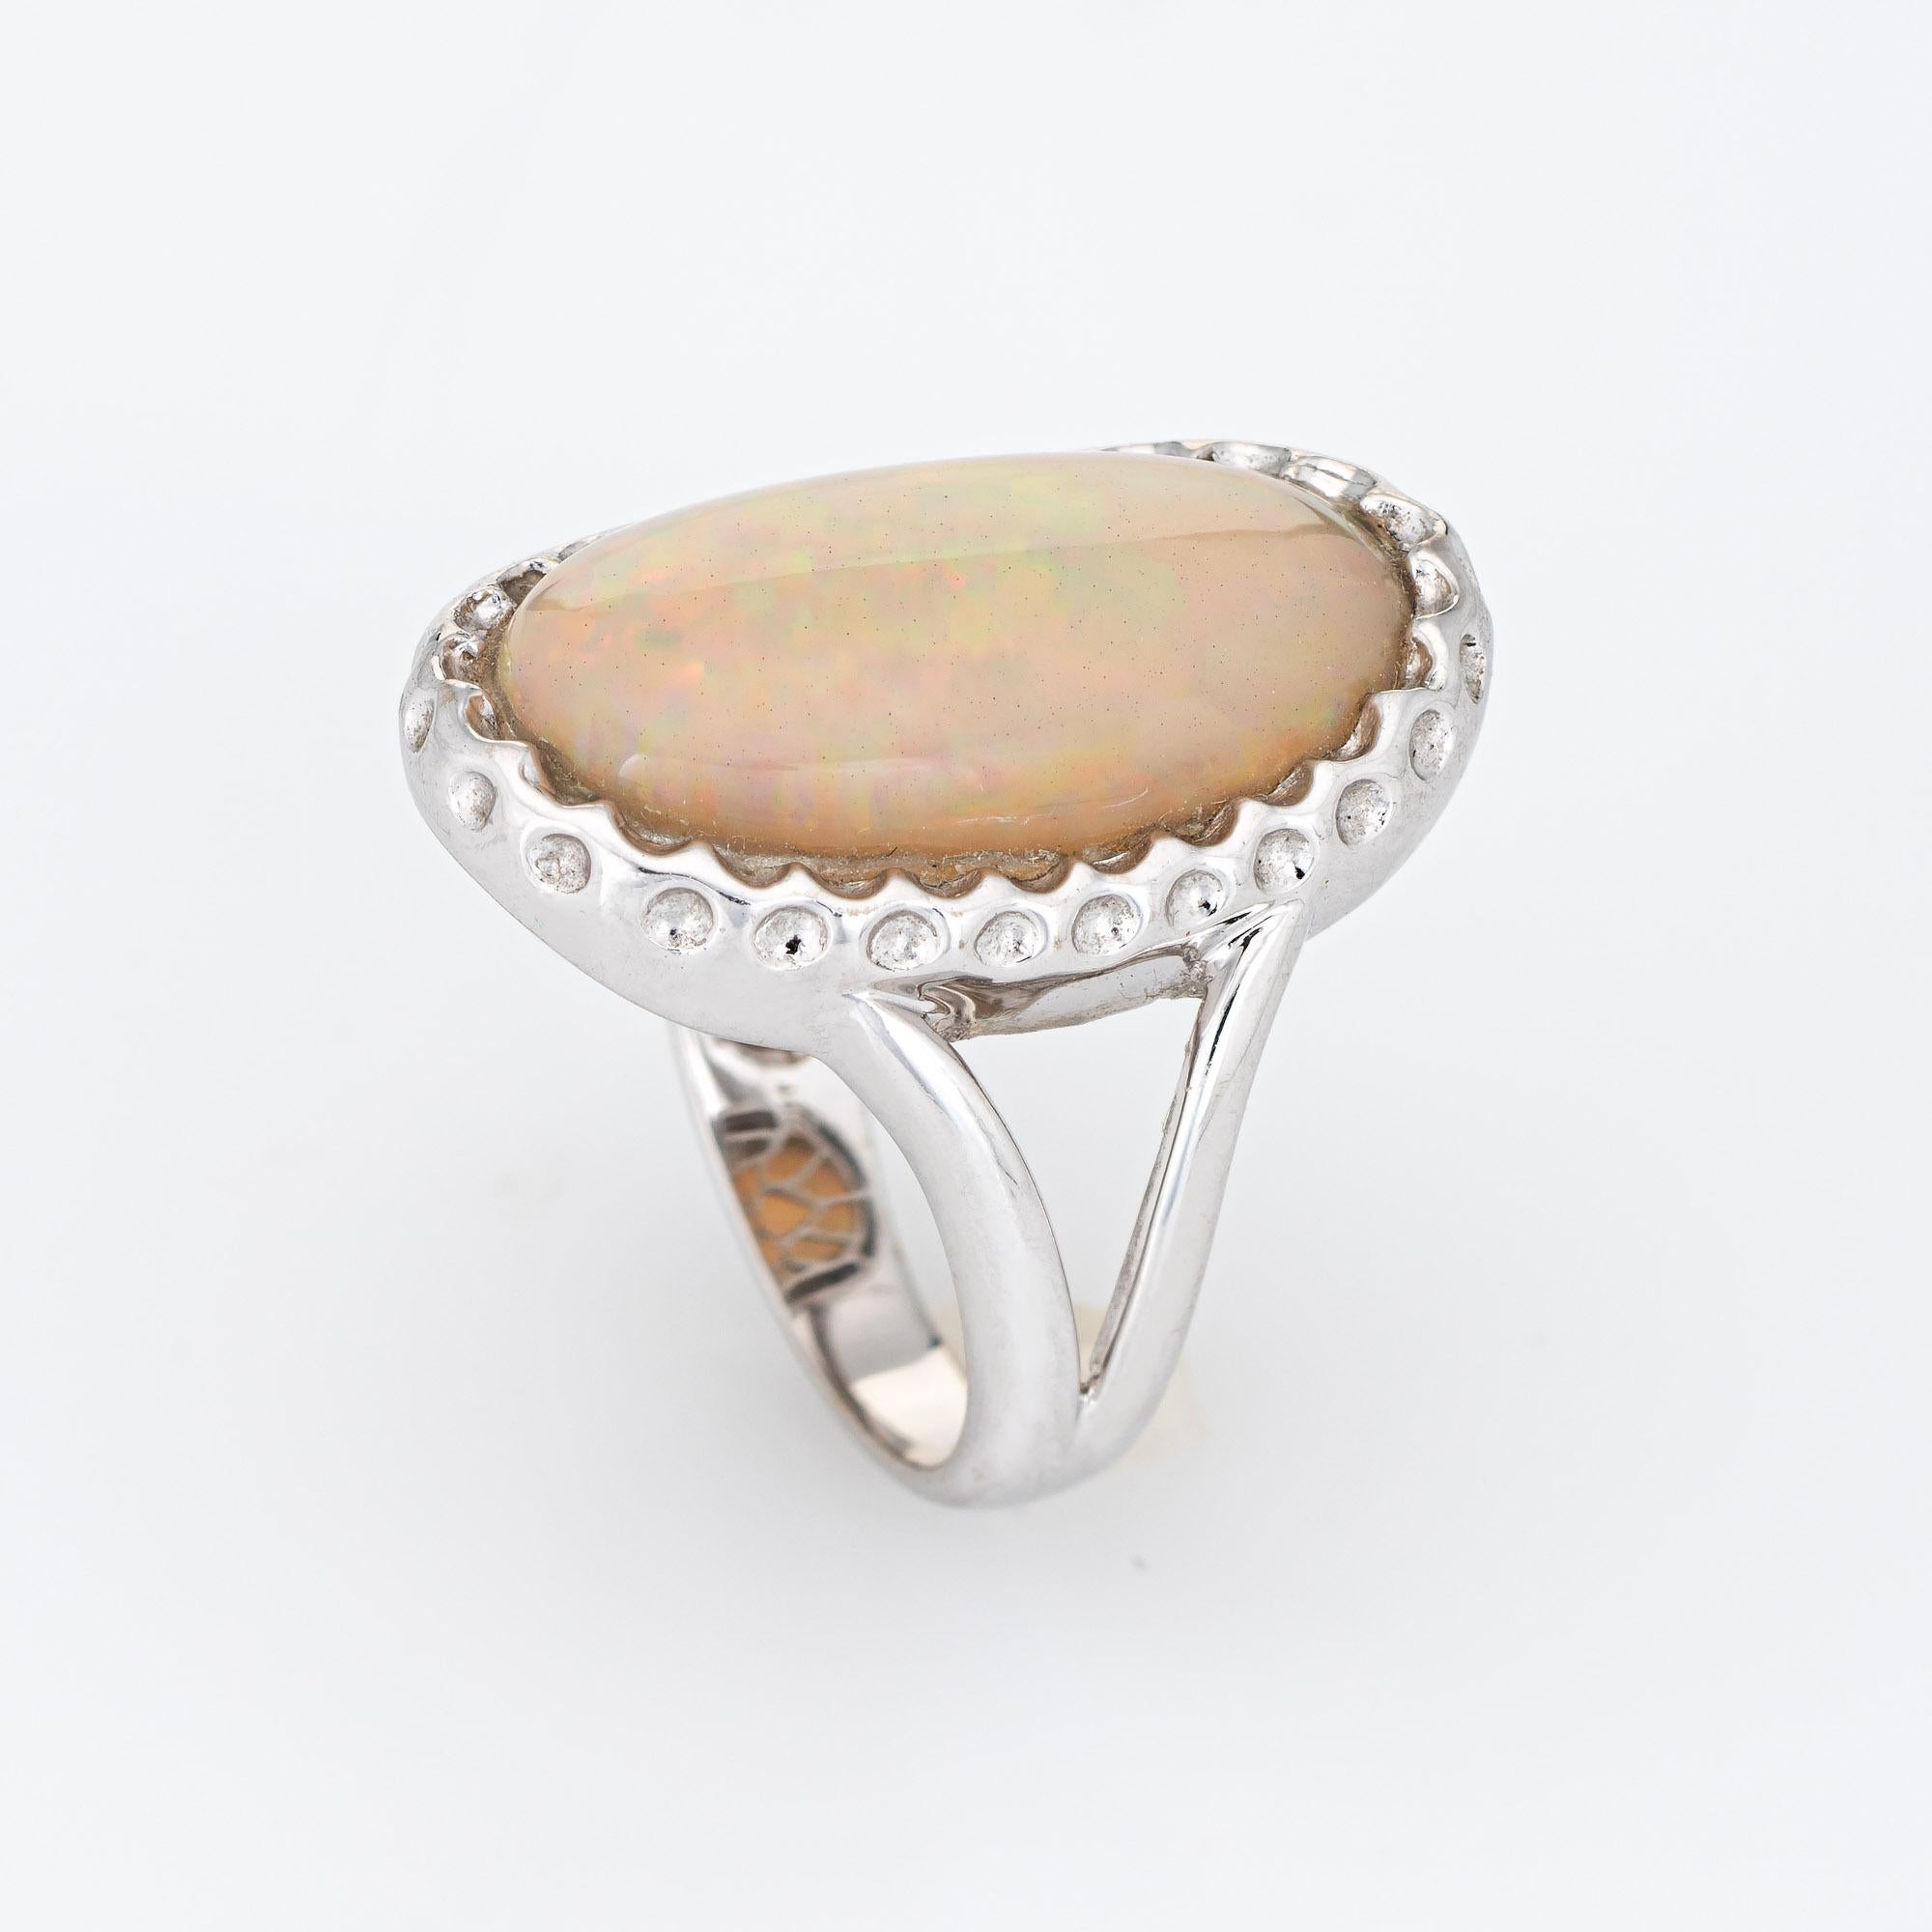 Stylish natural 8ct opal cocktail ring crafted in 14 karat white gold.

Cabochon cut natural opal measures 20mm x 12mm (estimated at 8 carats). The opal is in excellent condition and free of cracks or chips. 

The natural opal is Ethiopian in